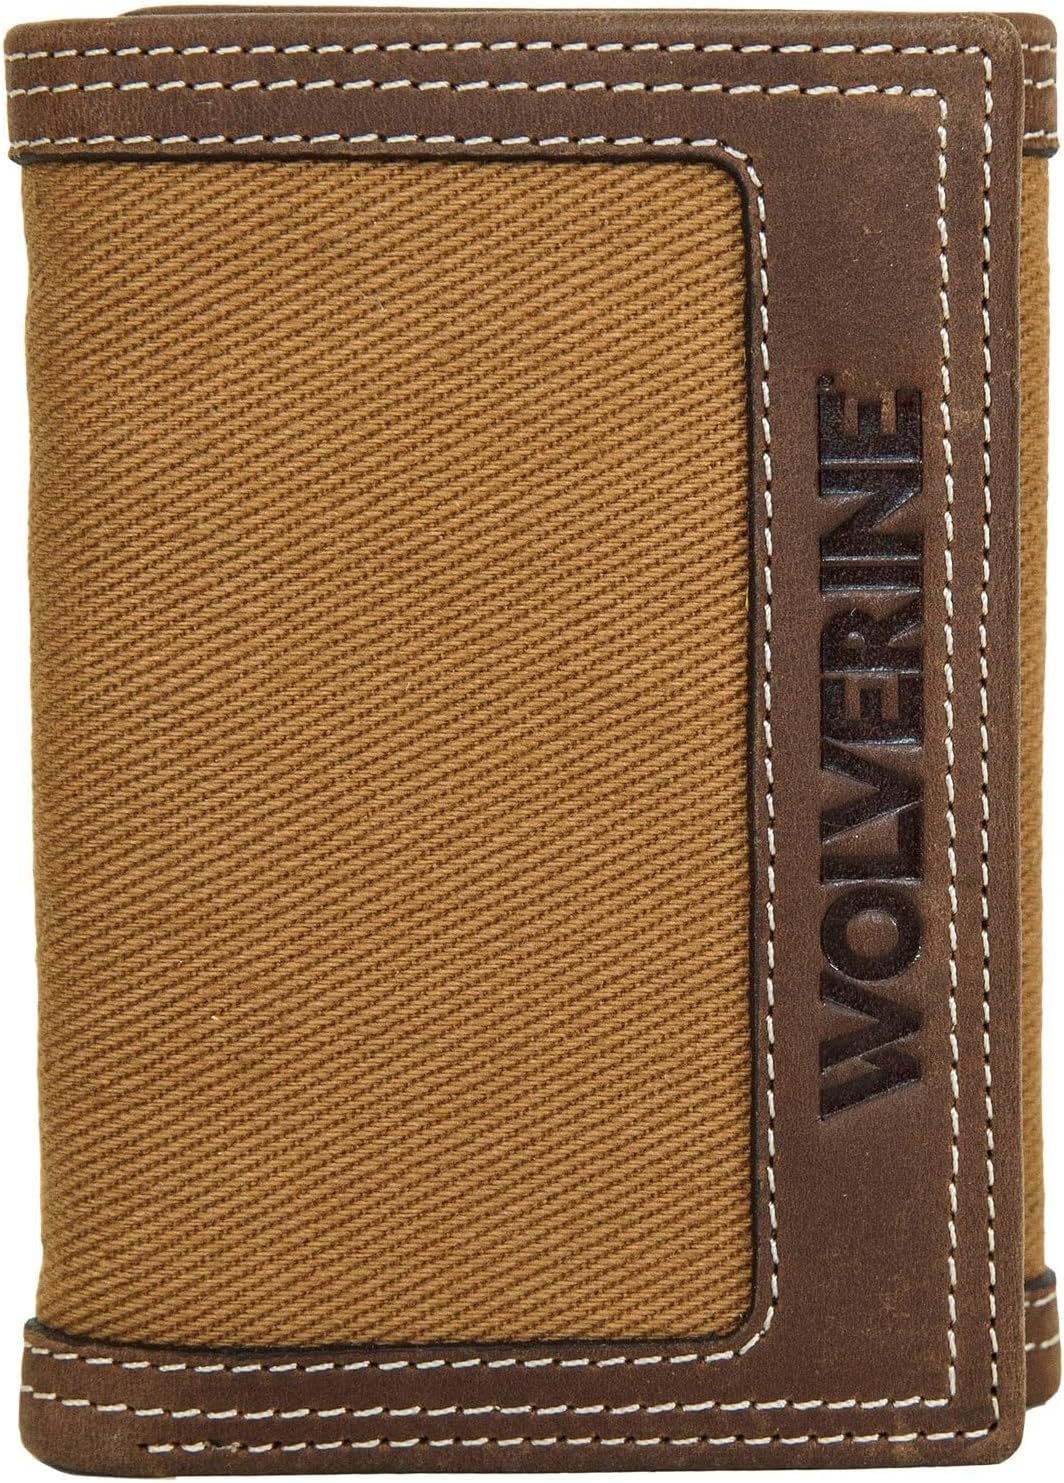 WOLVERINE Trifold Wallet Review